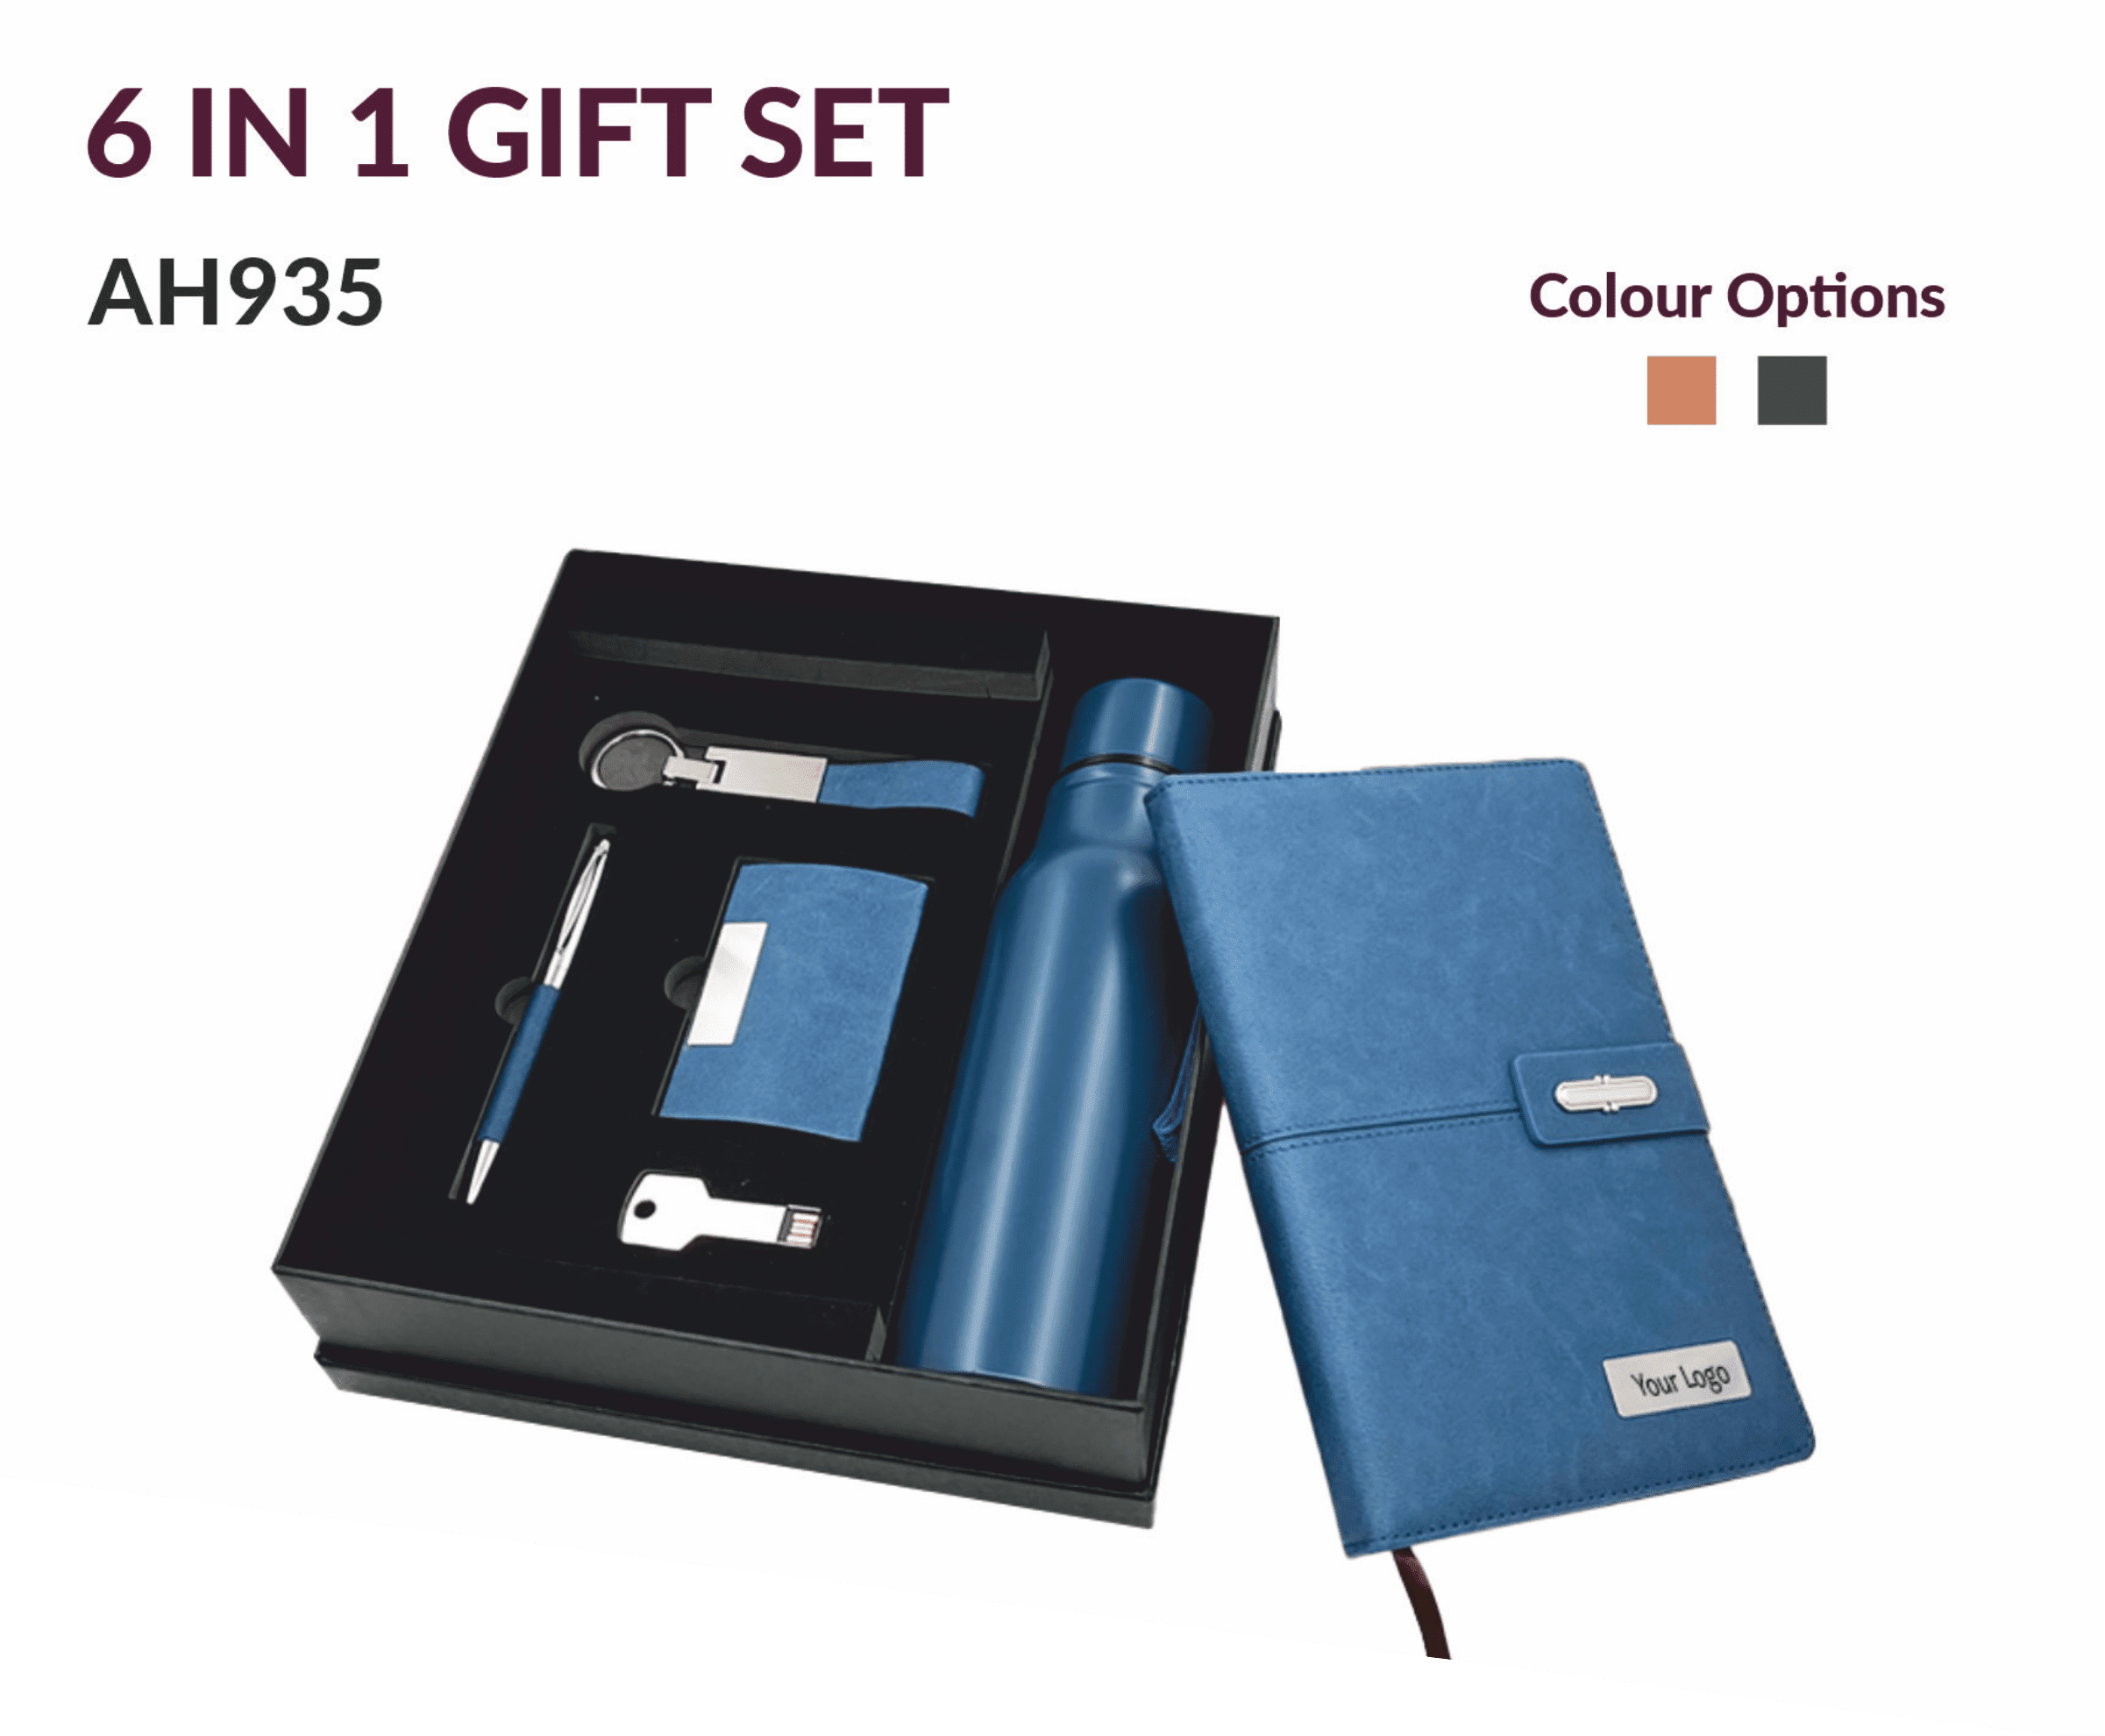 6 IN 1 GIFT SET